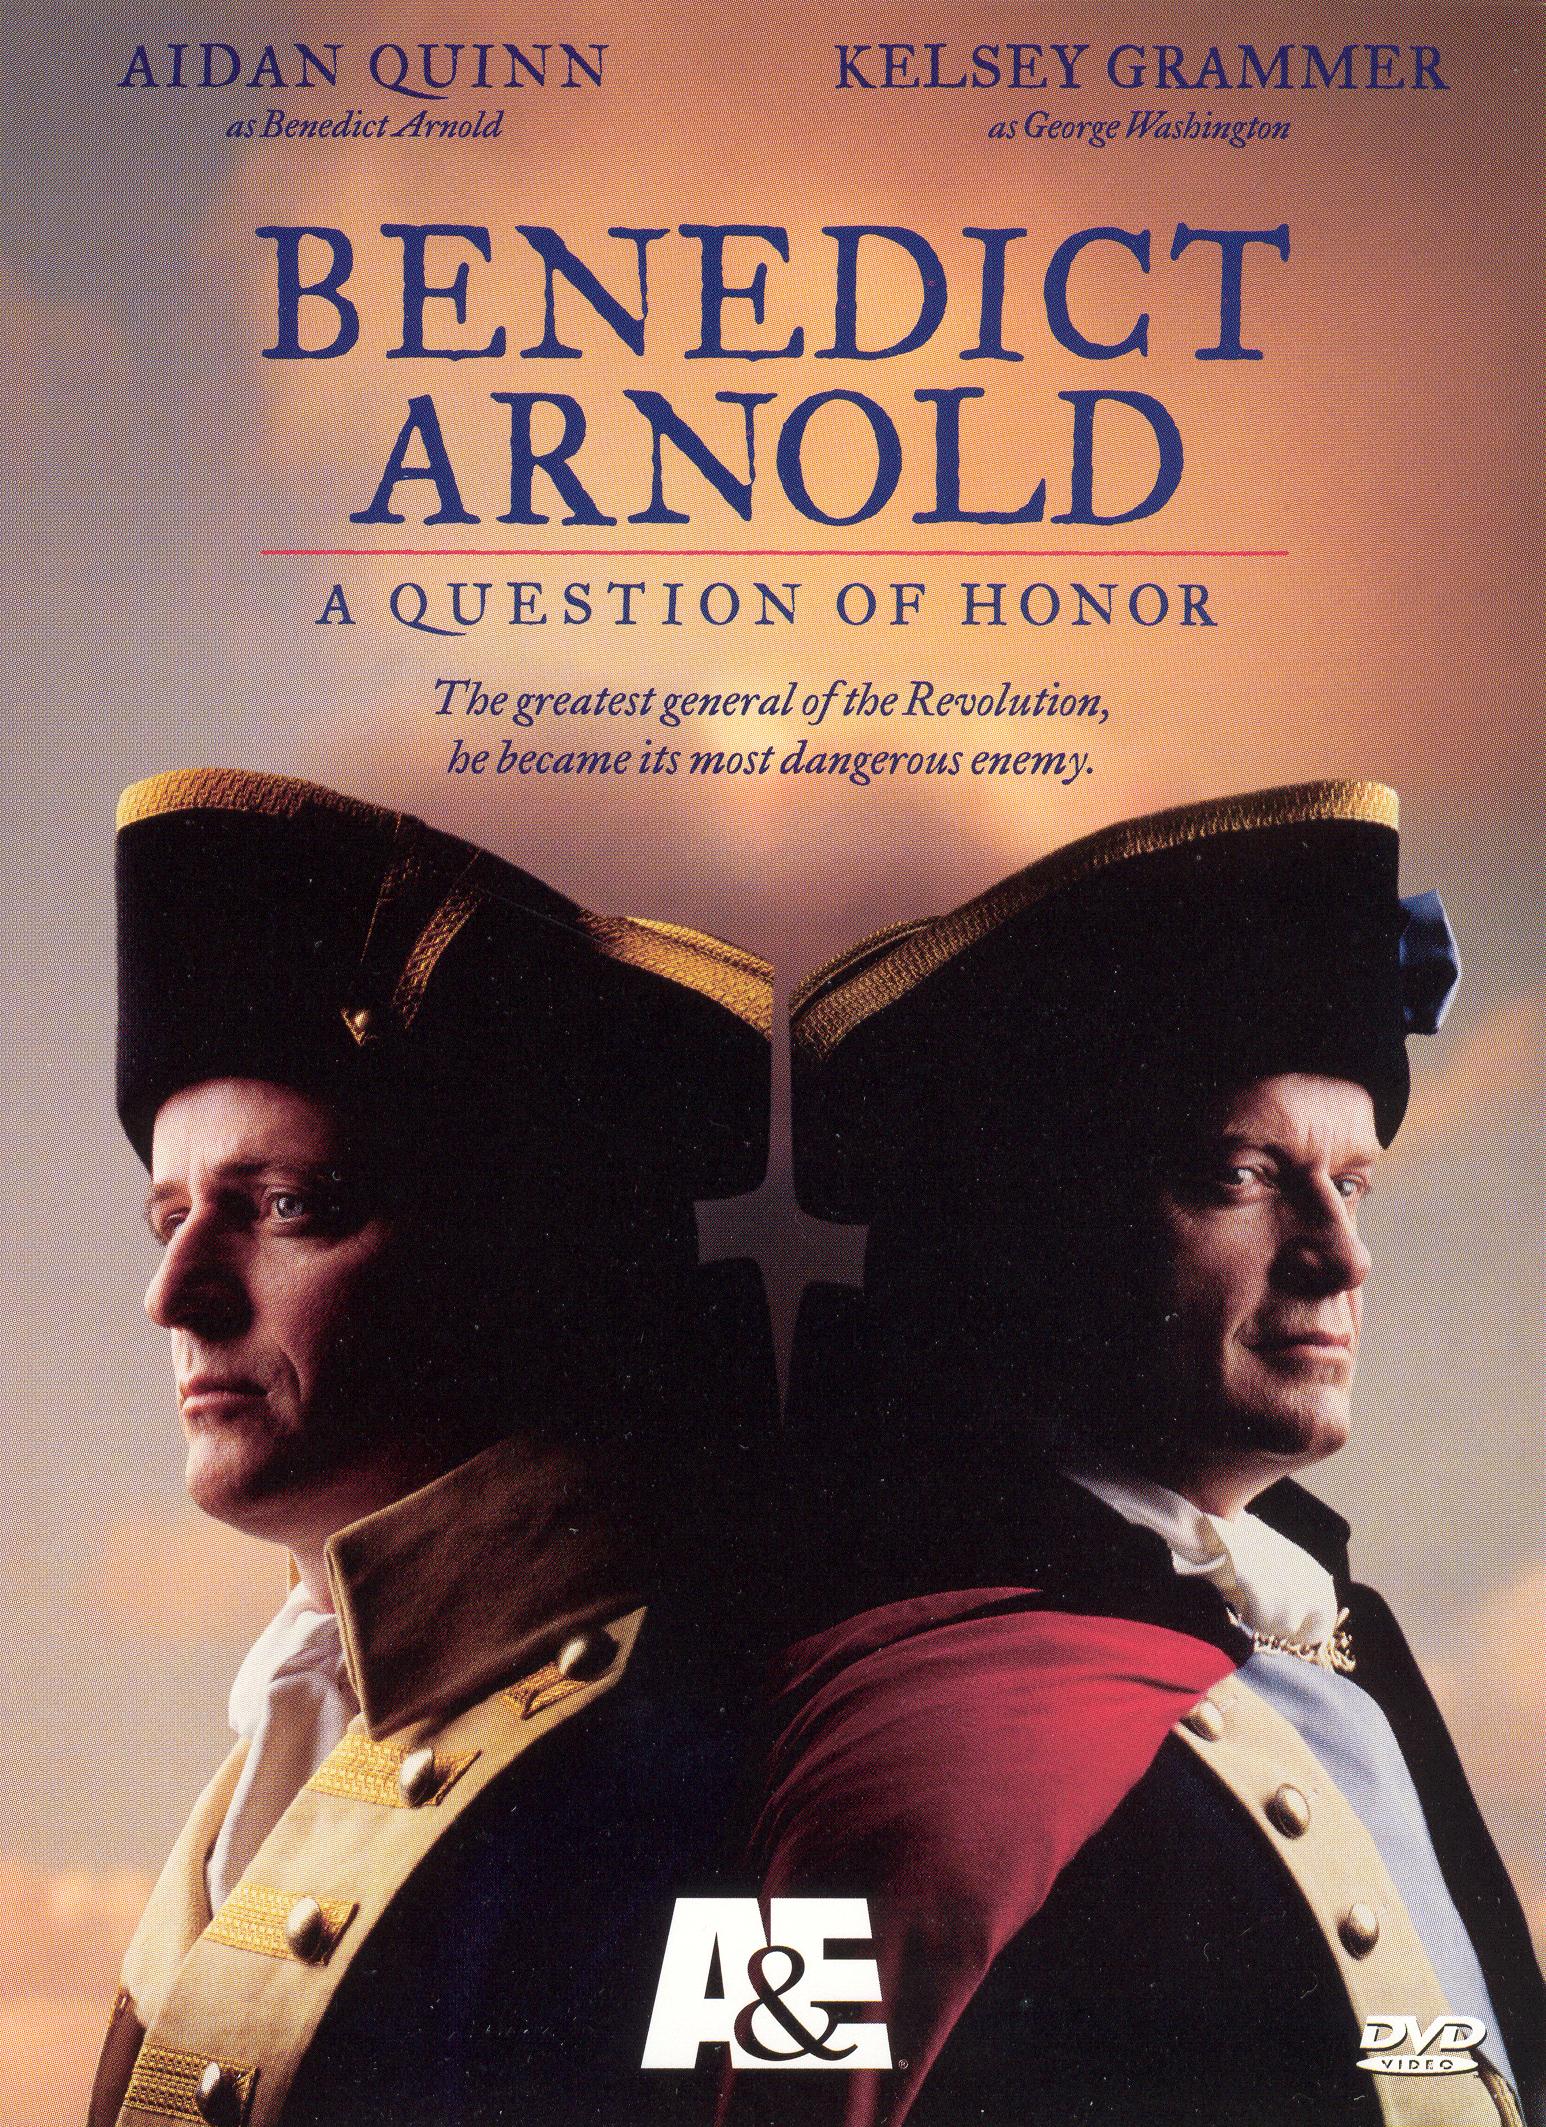 Benedict Arnold: A Question of Honor [DVD] [2002] - Best Buy